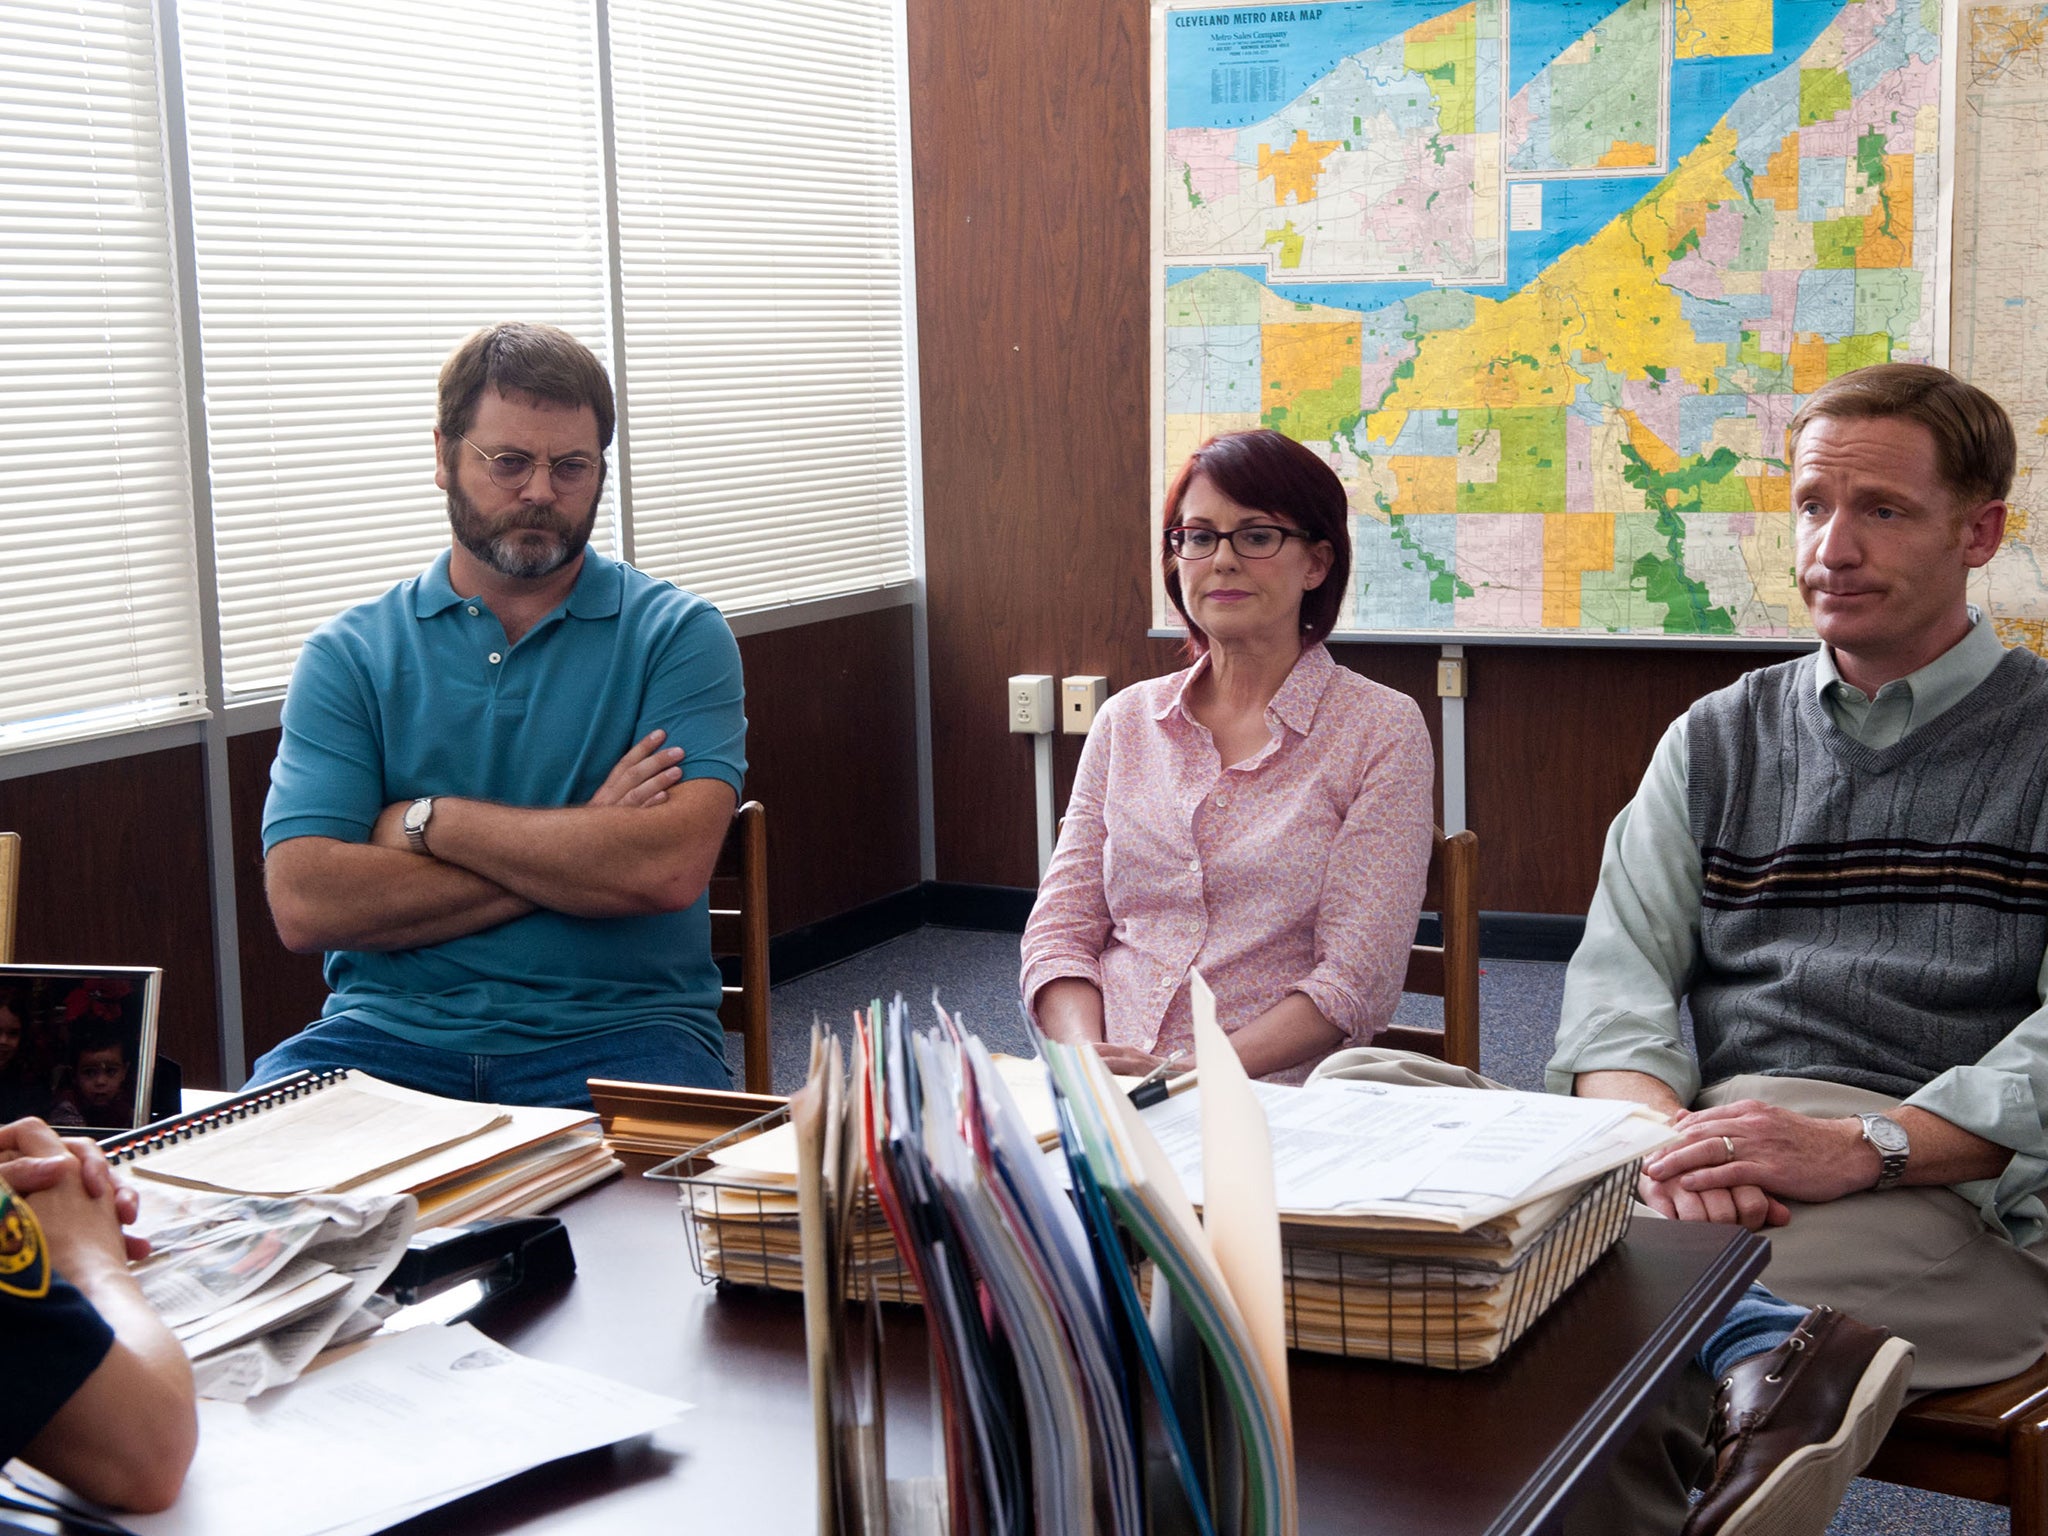 &#13;
Nick Offerman, Megan Mullally, and Marc Evan Jackson star in the 2013 film ‘The Kings of Summer’ &#13;